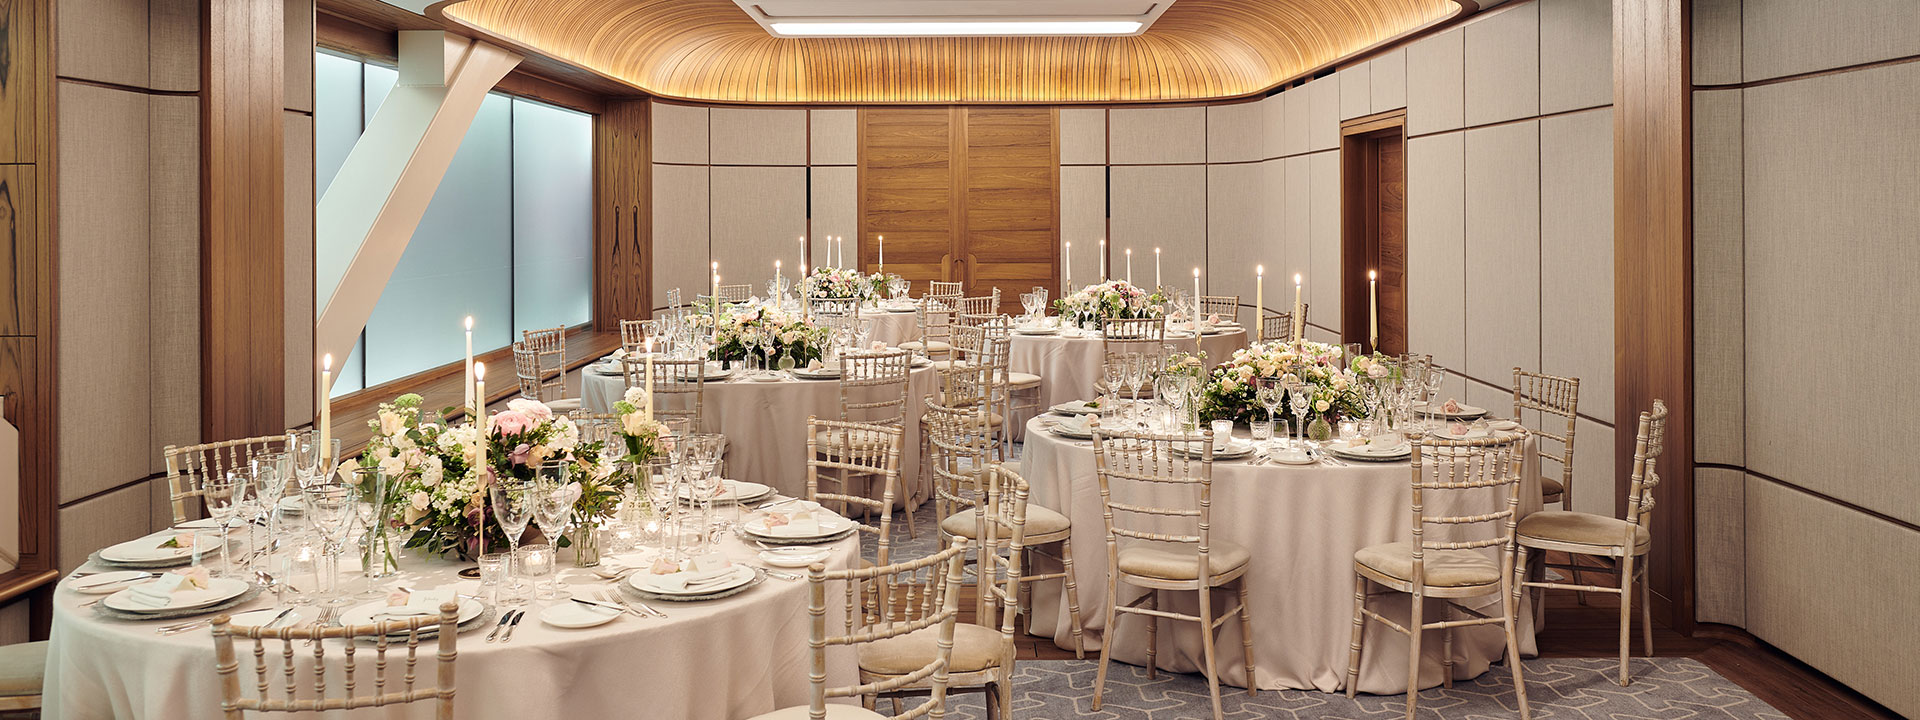 Decorated with flowers and candles, the Wilton Room, in a champagne palette, is a great interior for celebrations.